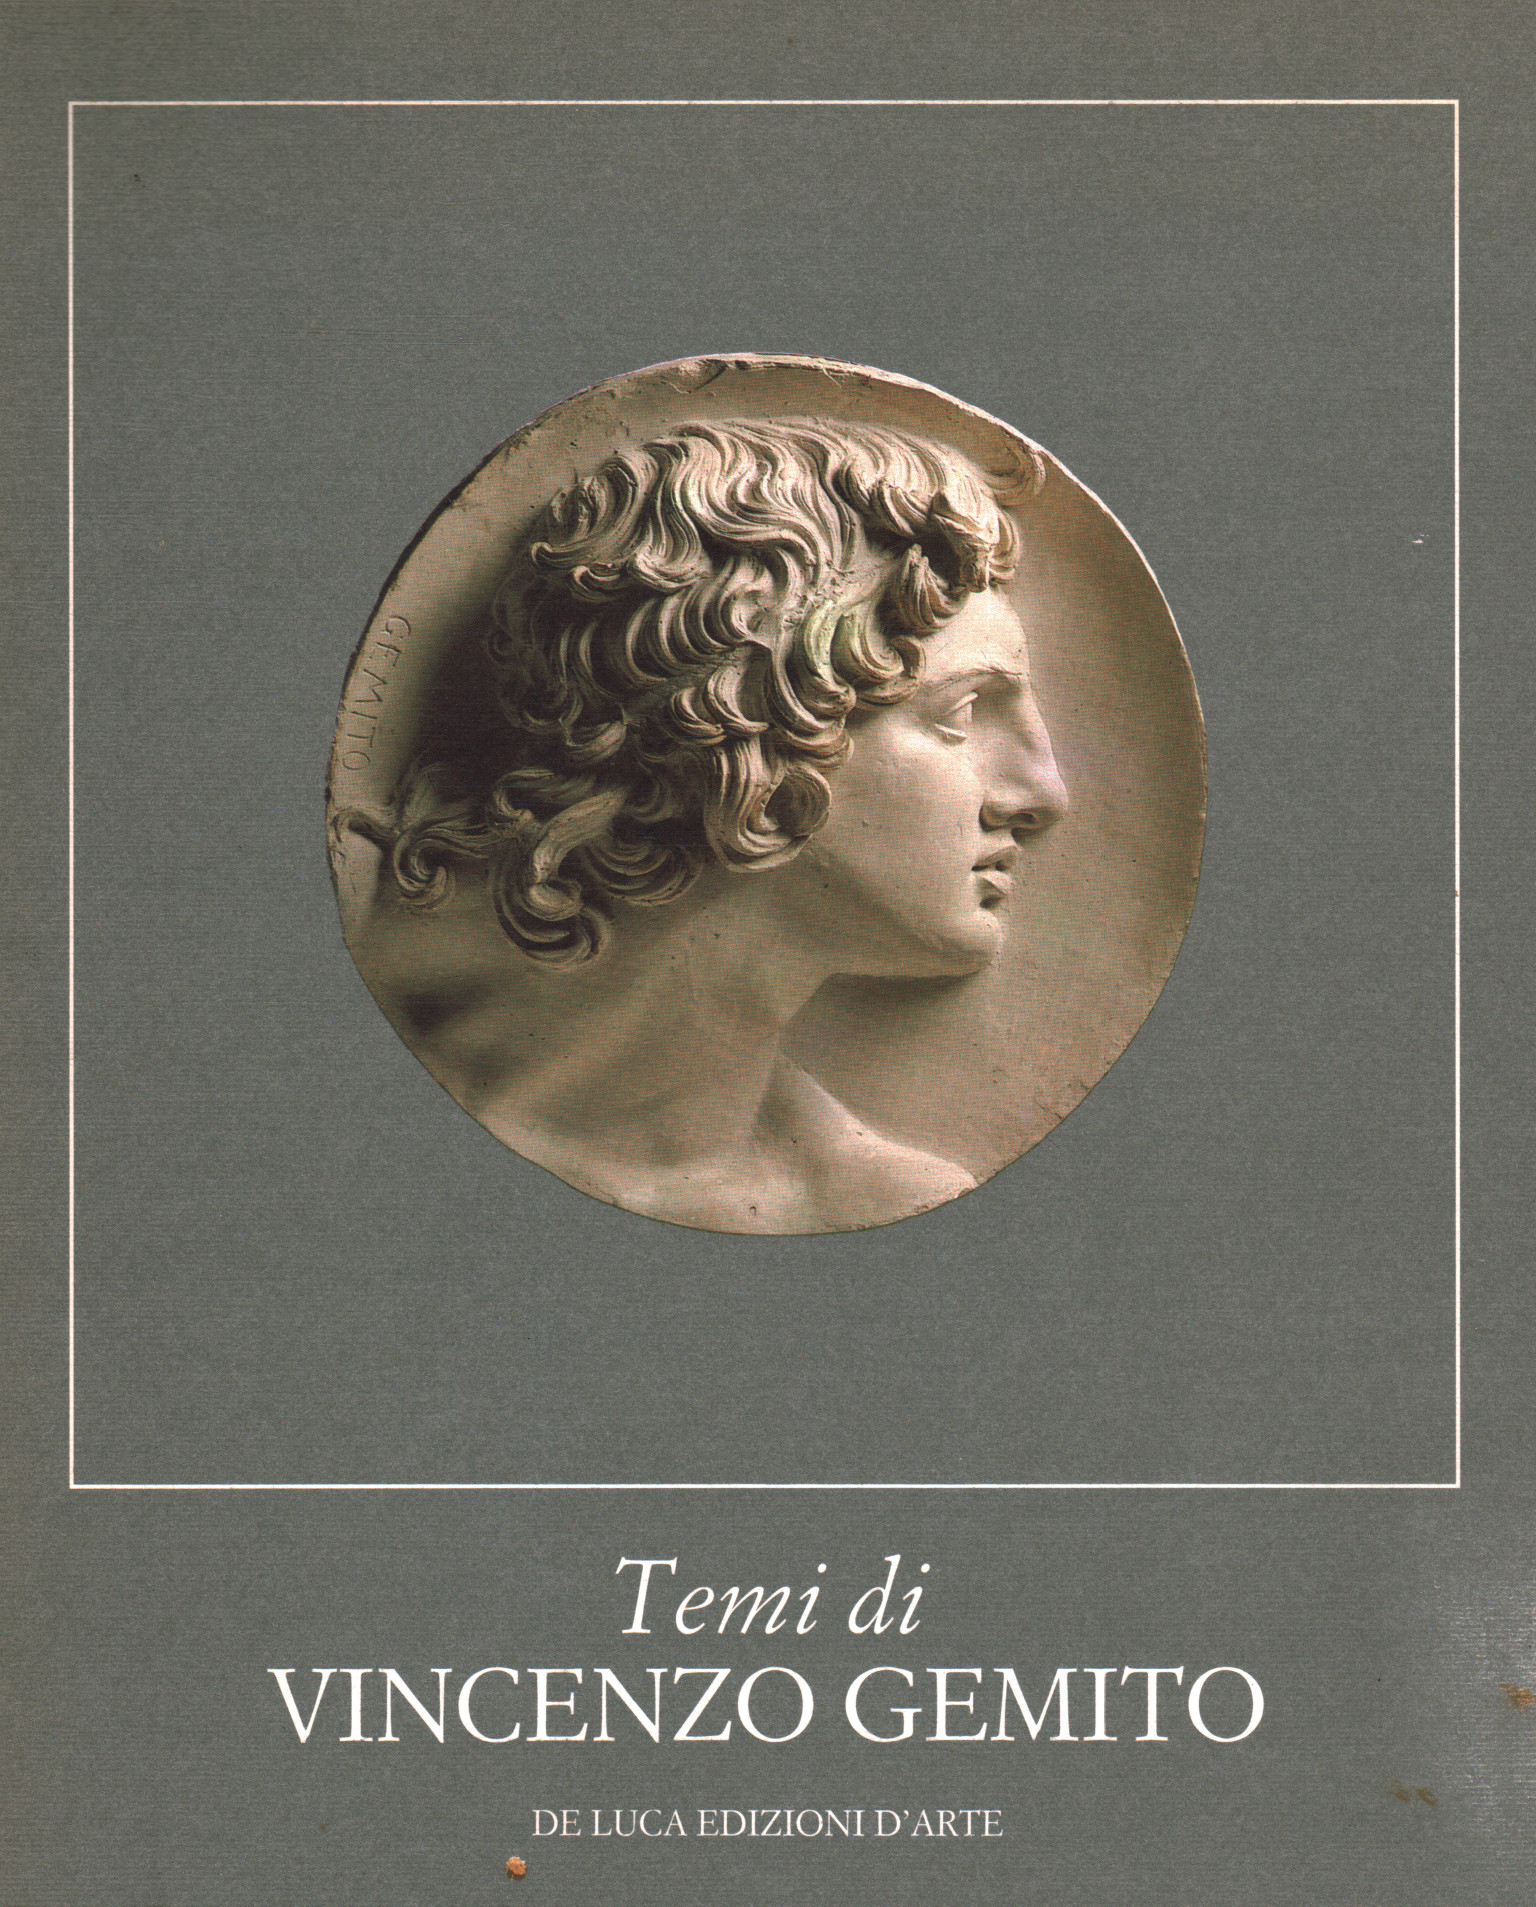 Themes by Vincenzo Gemito